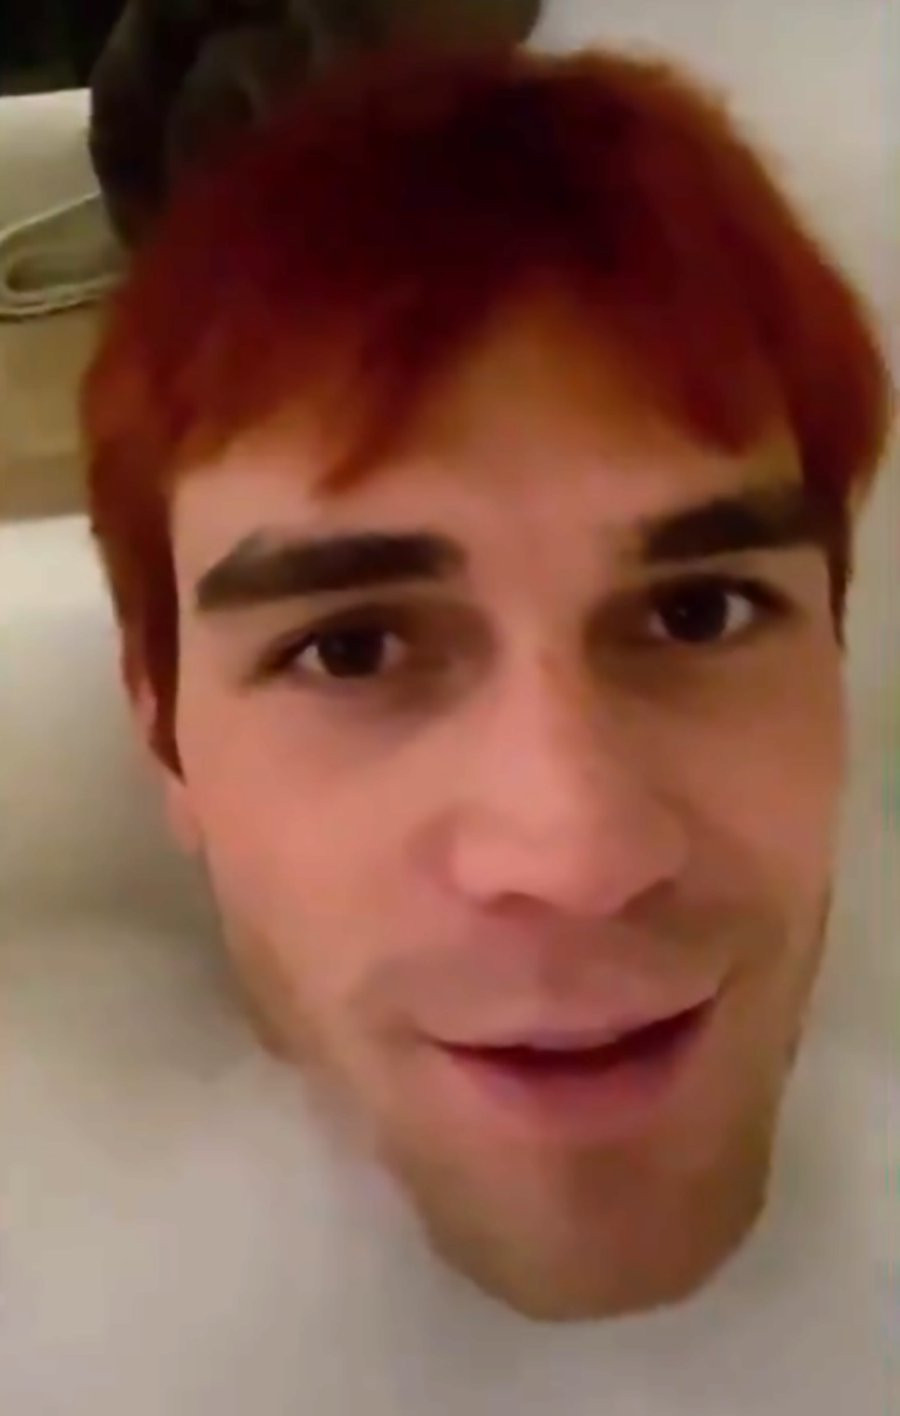 KJ Apa publicly shares video of him in bath meant for close pals but handles mishap like a champ: ‘Too late now’